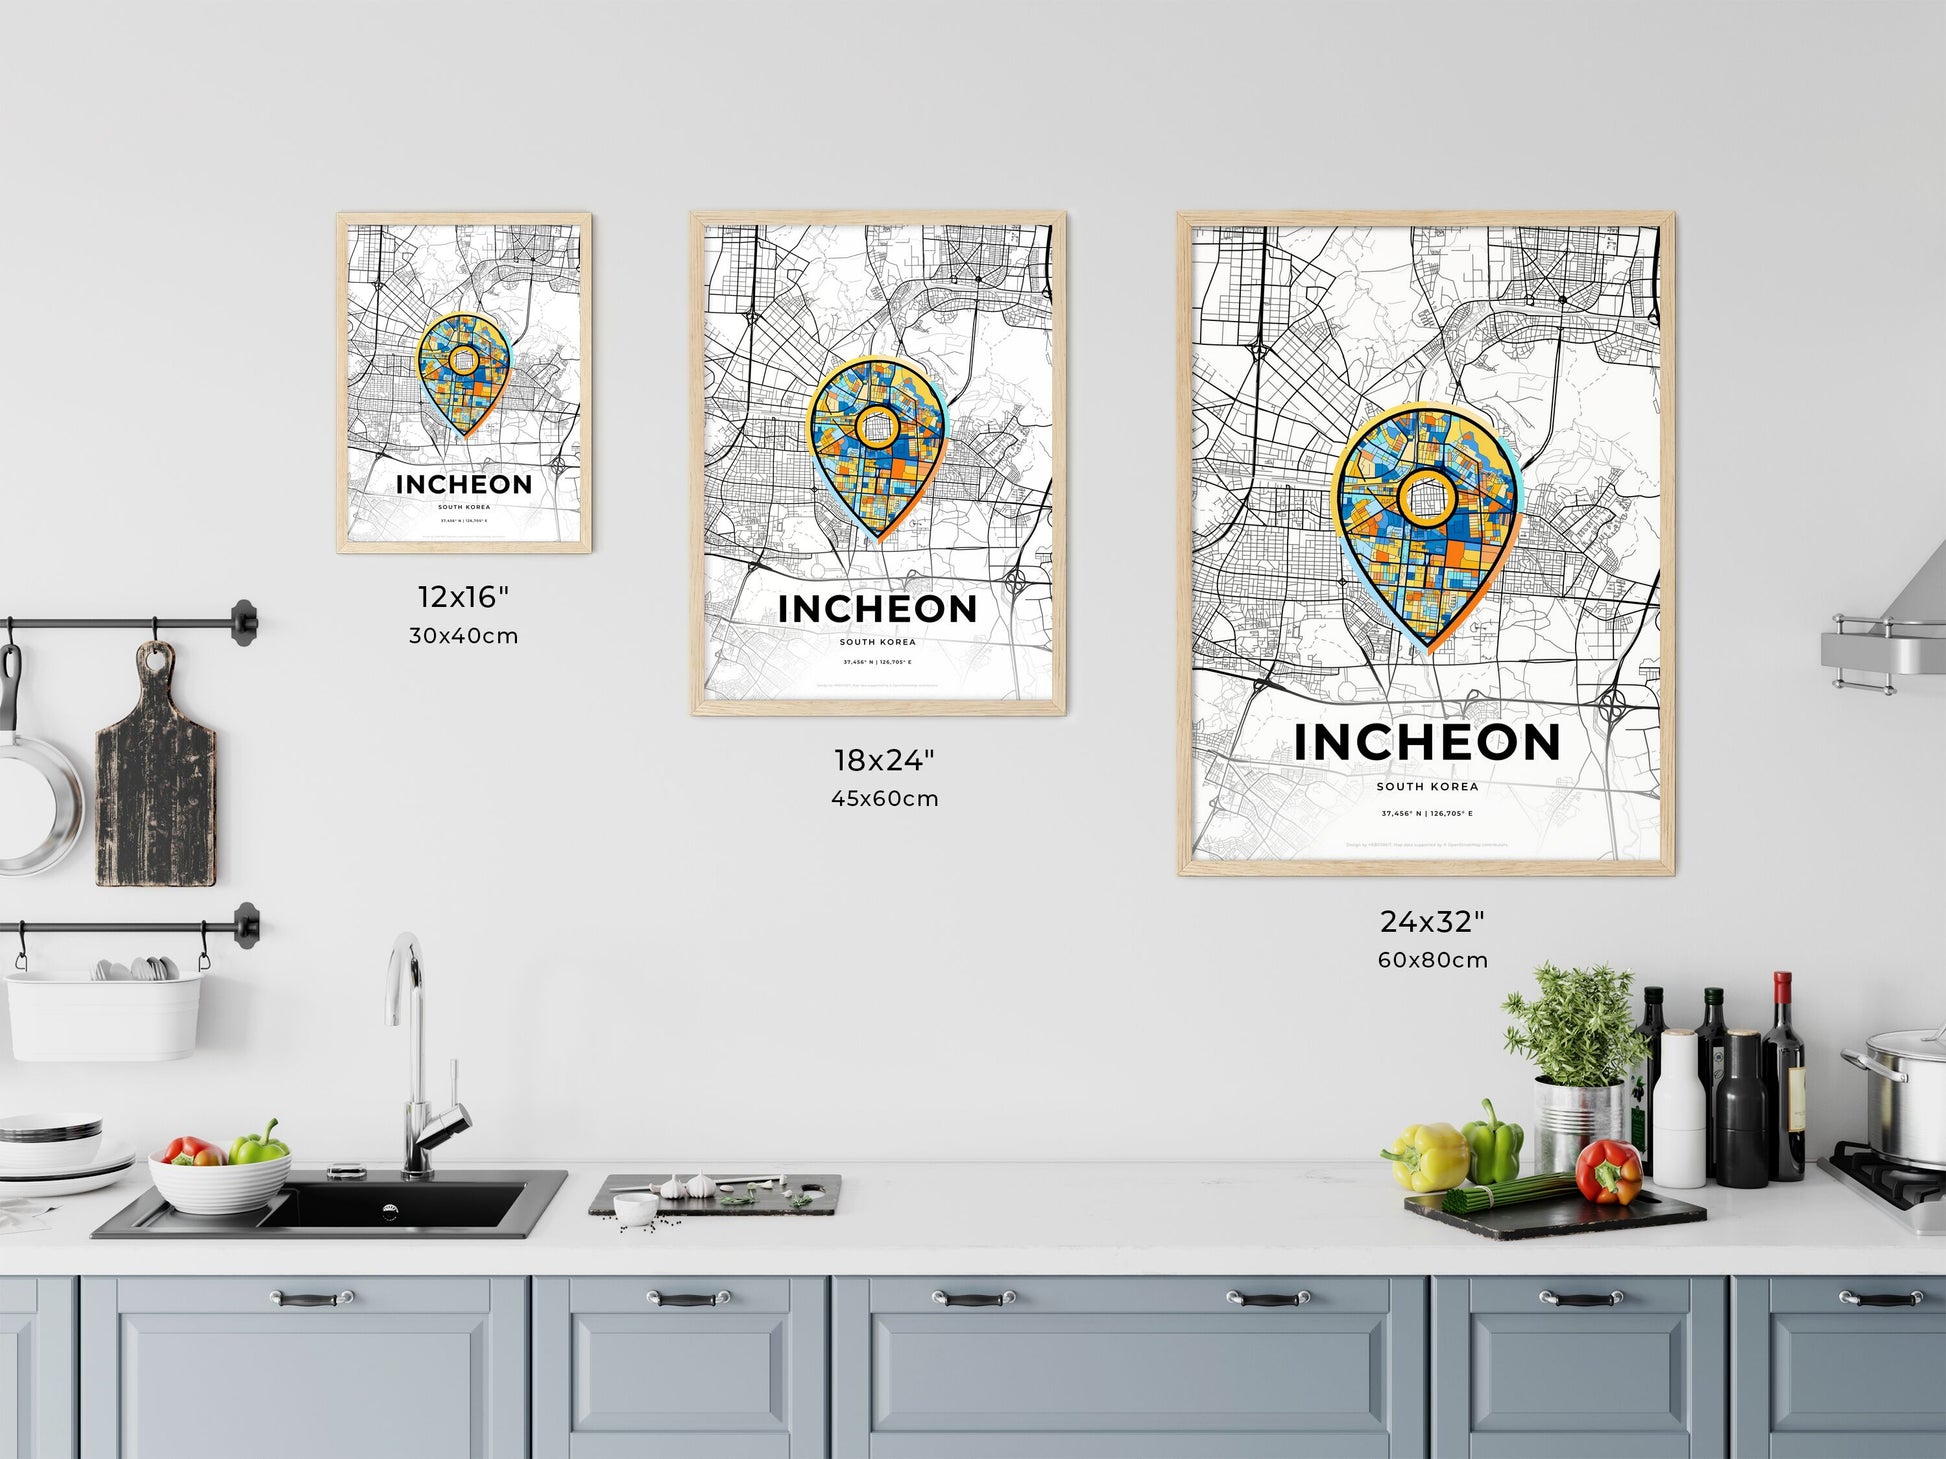 INCHEON SOUTH KOREA minimal art map with a colorful icon. Where it all began, Couple map gift.